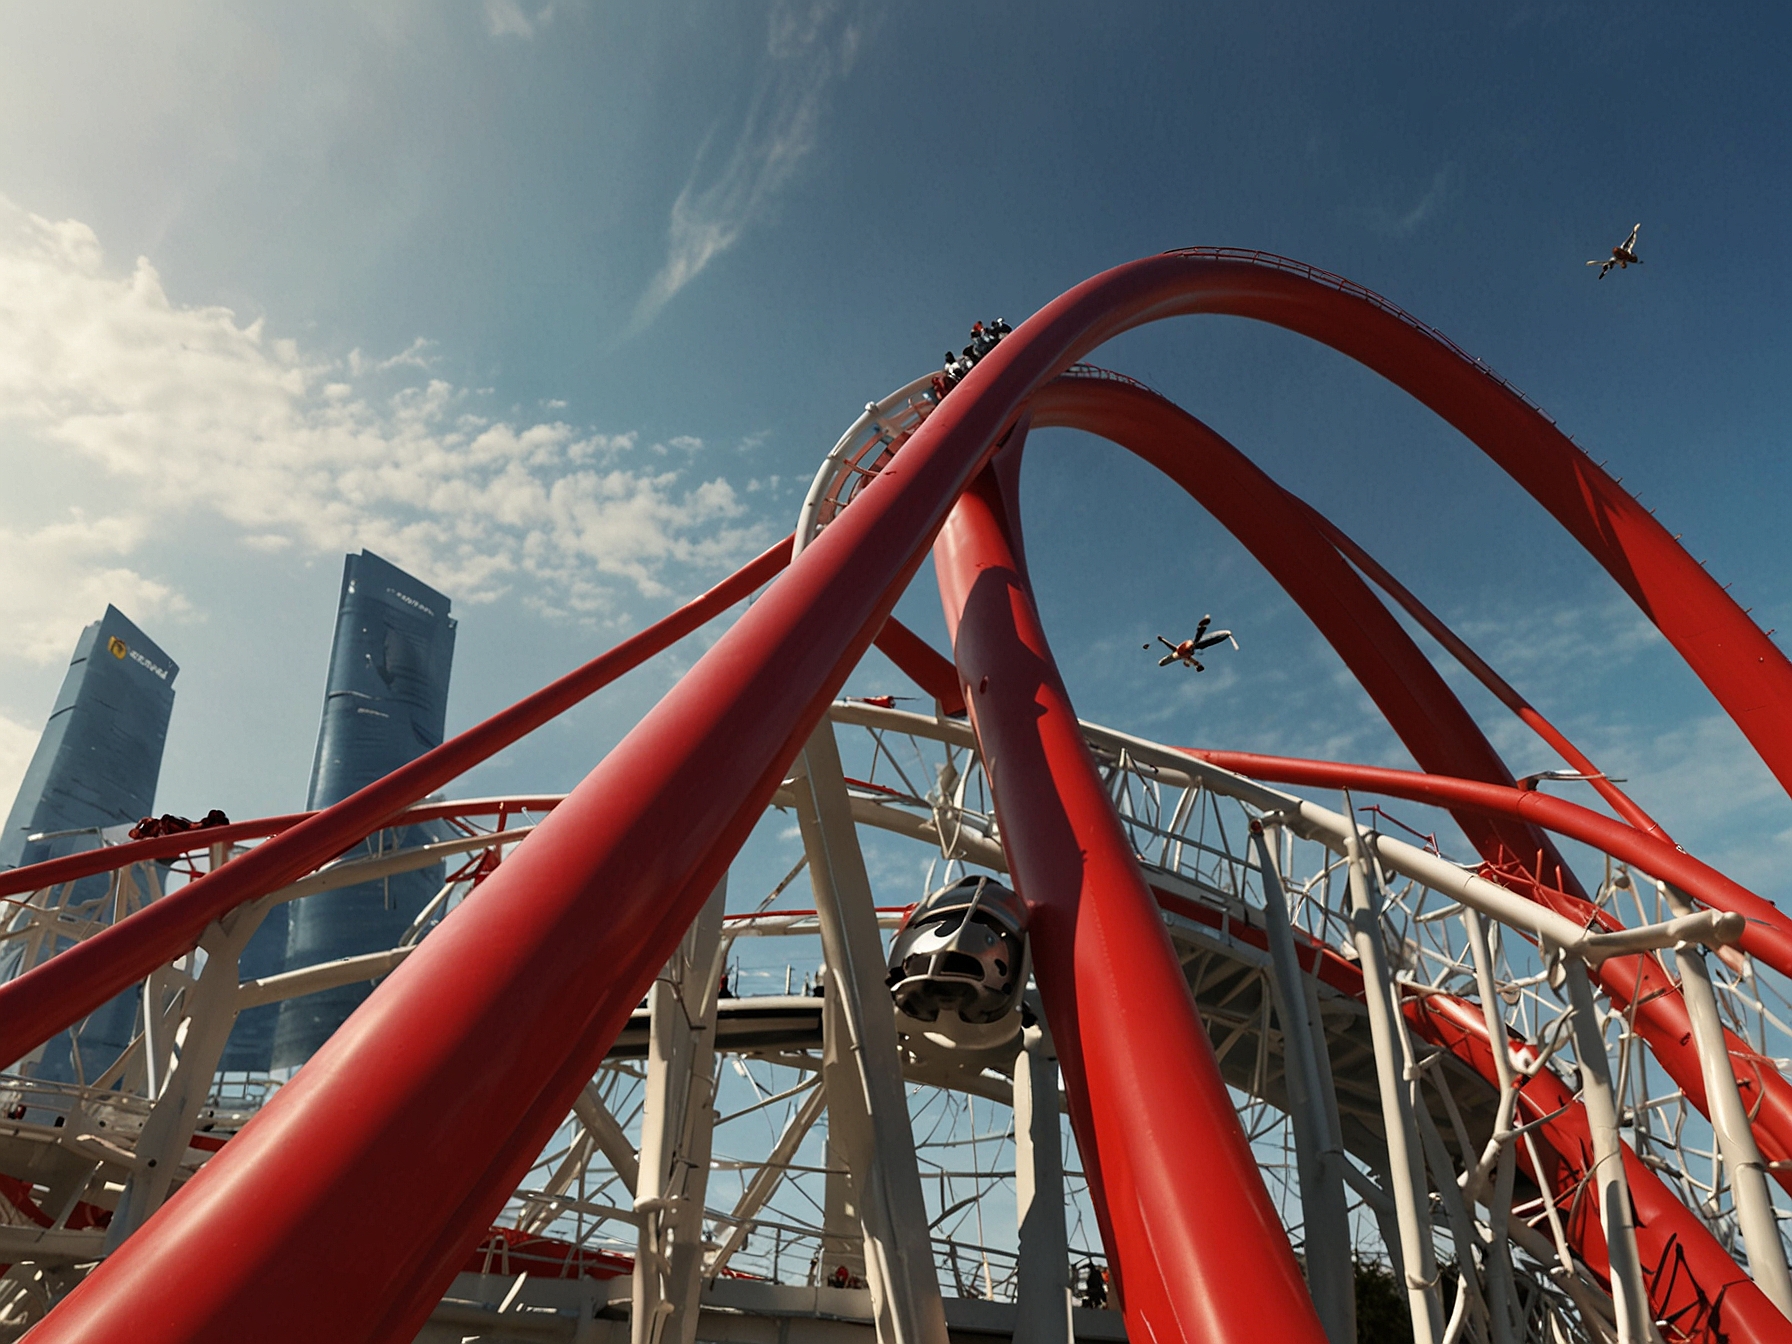 Thrilling roller coaster ride at Ferrari World's Formula Rossa, capturing riders experiencing exhilarating speeds of up to 240 km/h against the backdrop of sleek, modern architecture.